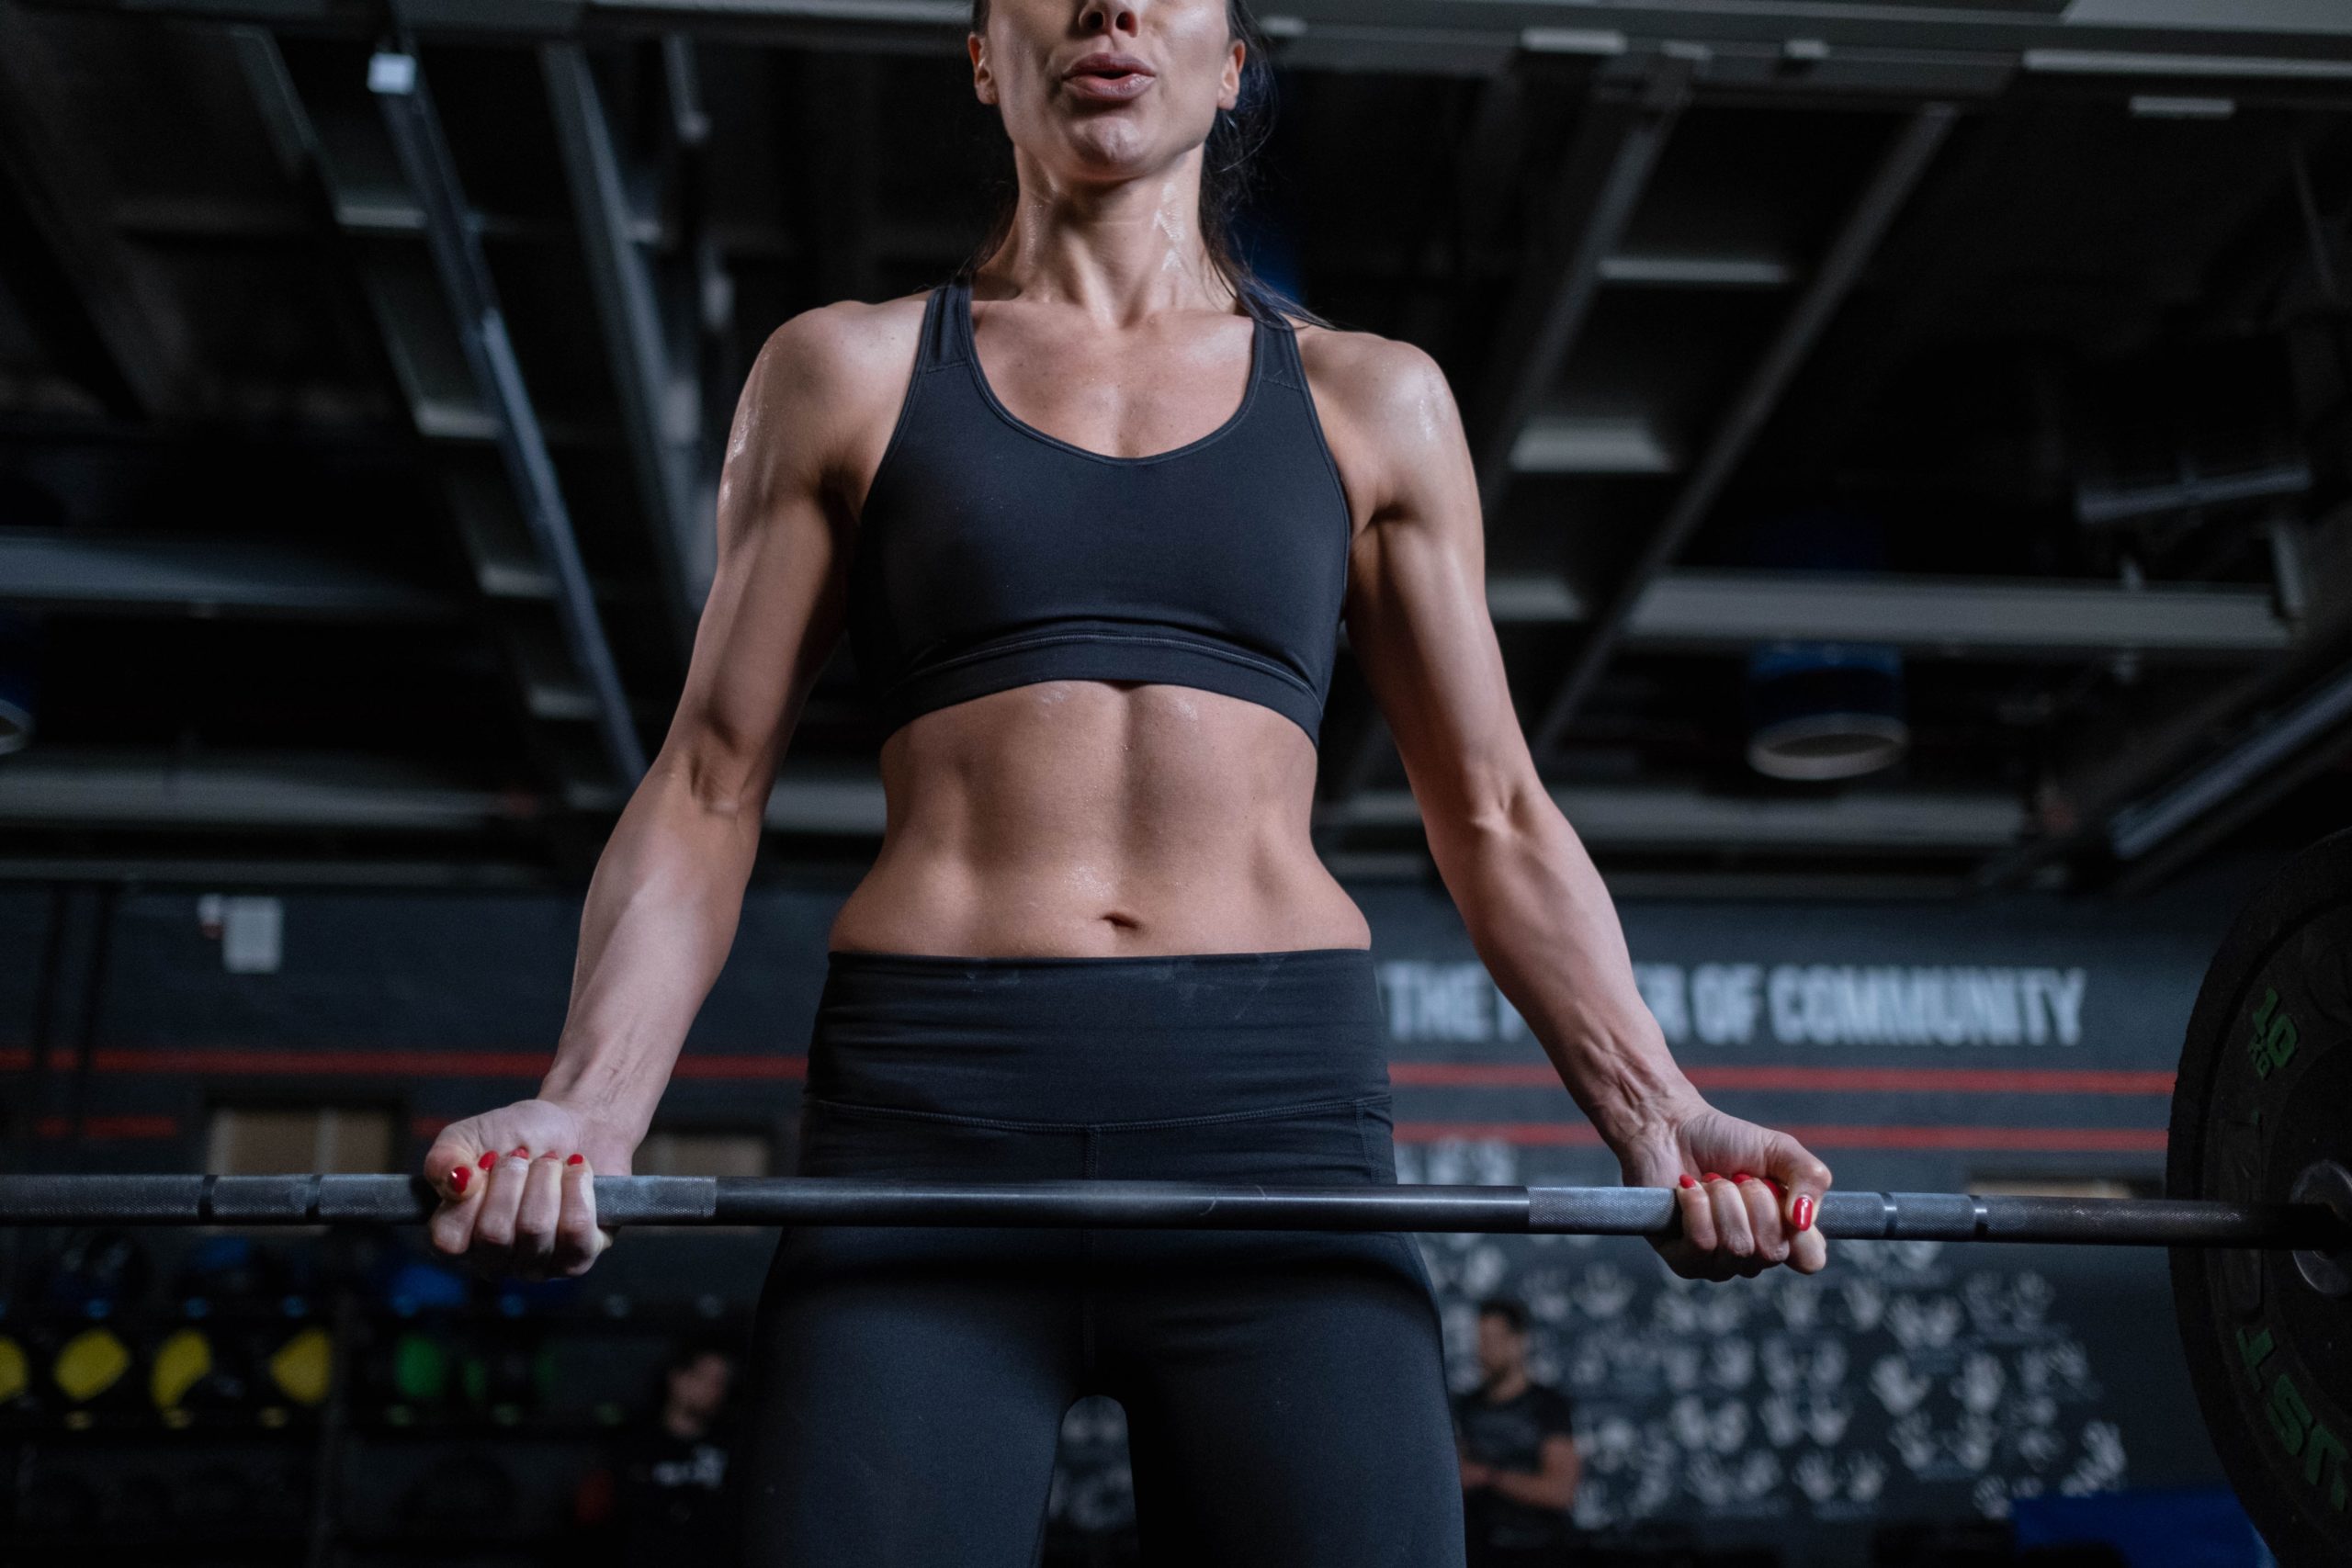 A woman lifting a barbell